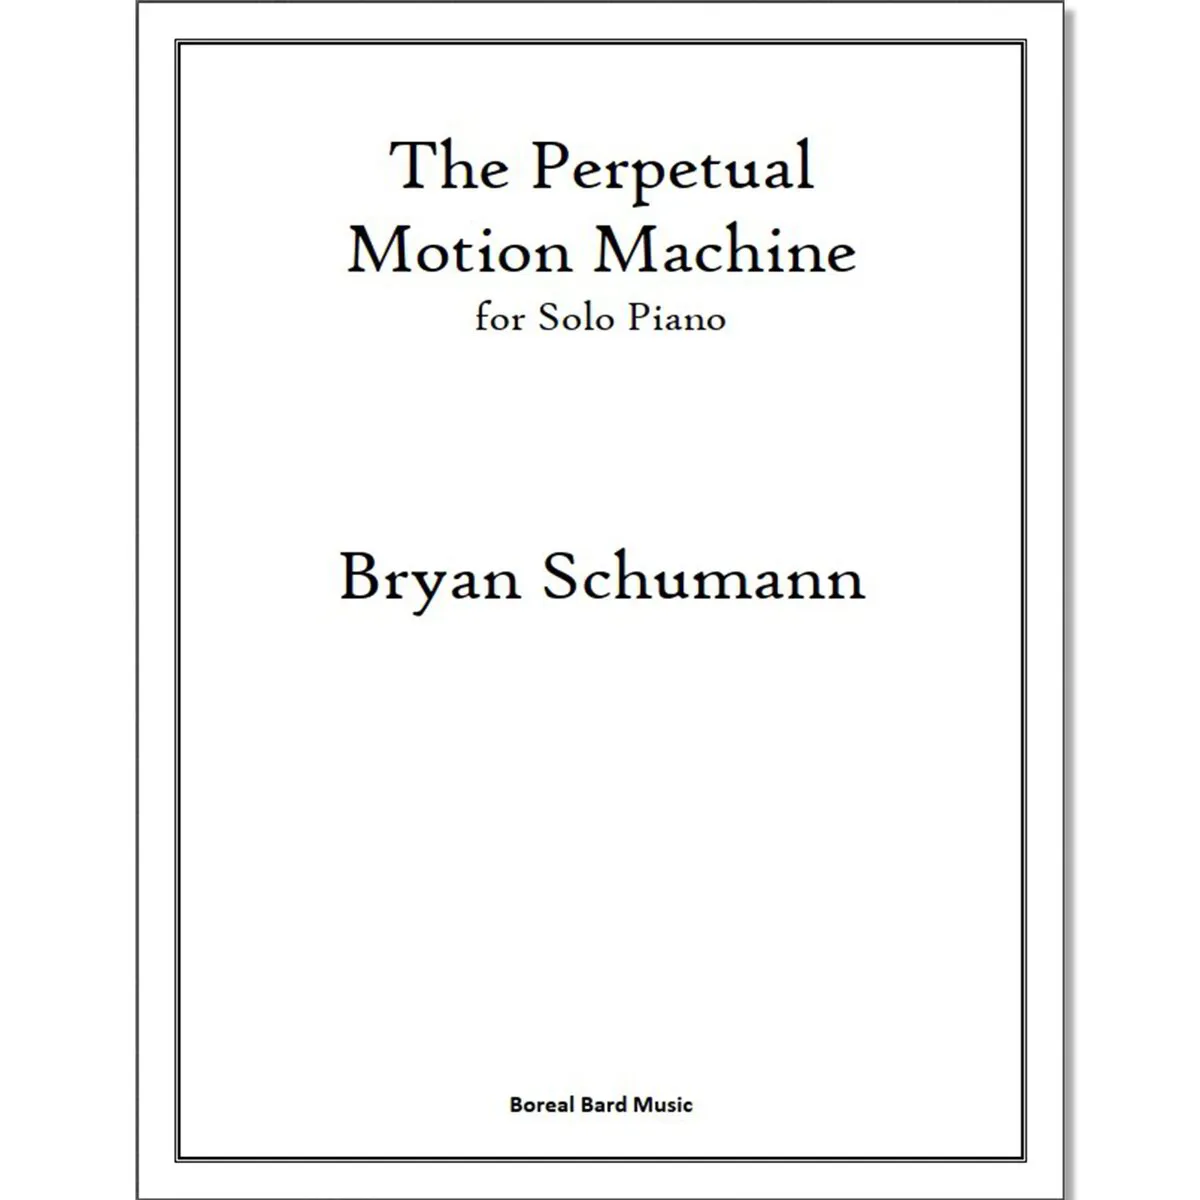 The Perpetual Motion Machine for Solo Piano (sheet music download)